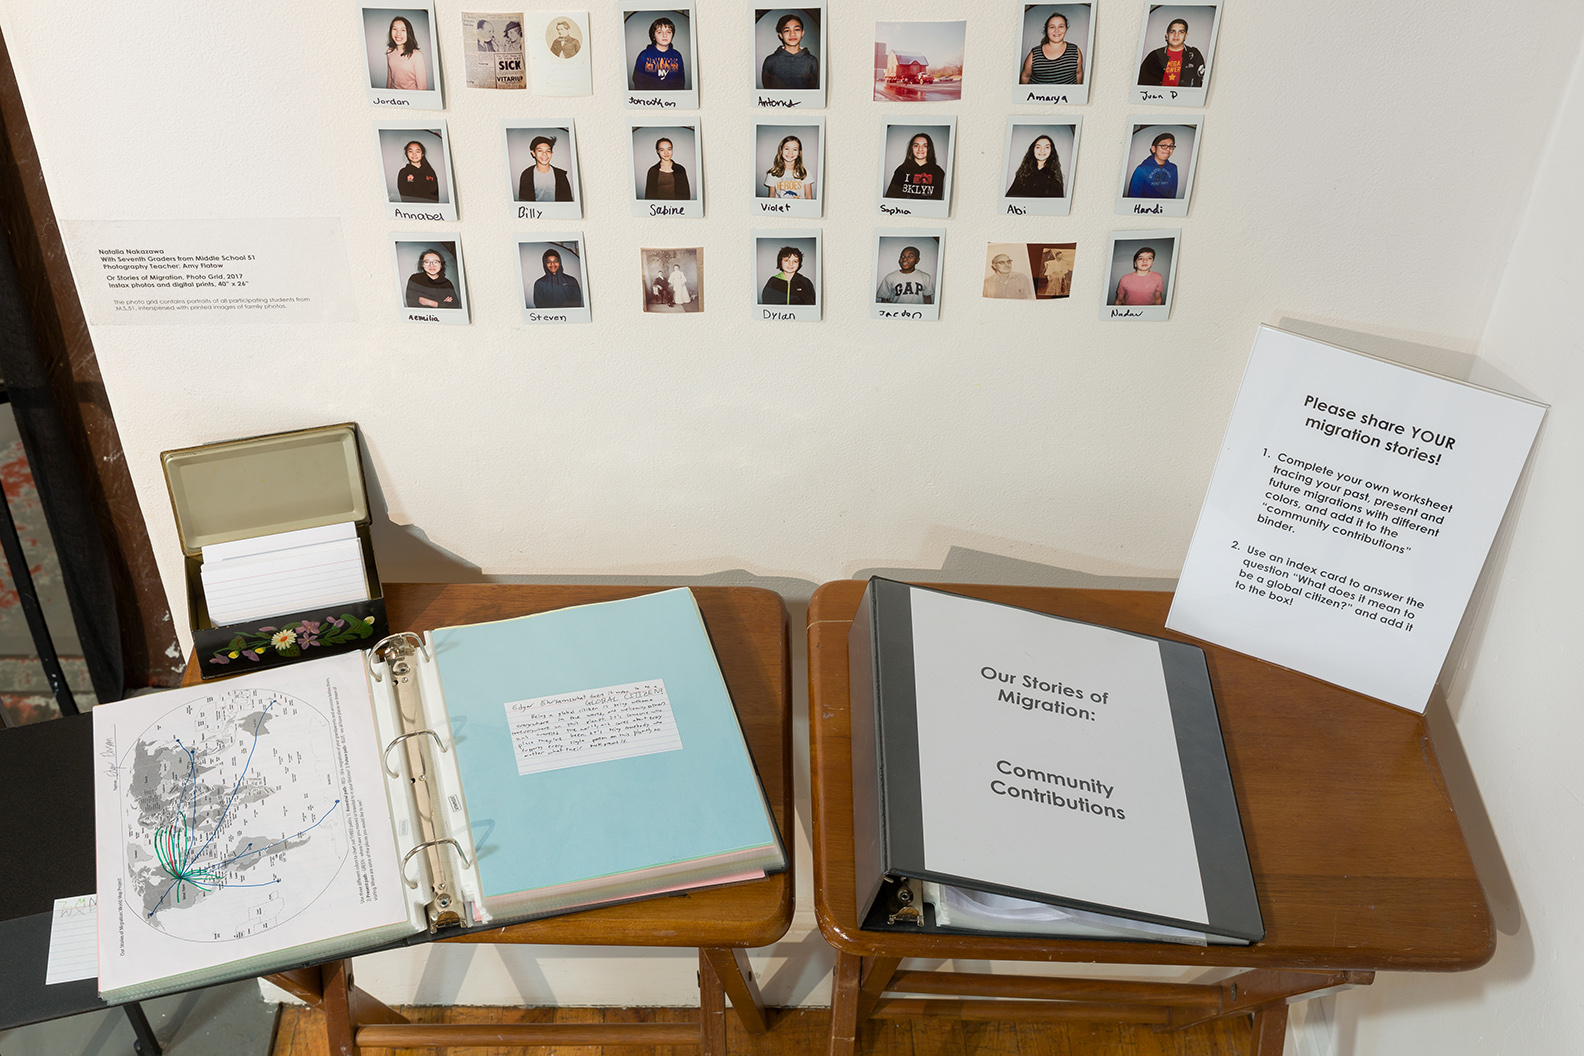  Mapping binder and view of student photo grid - pat of "Our Stories of Migration"  Photo credit: Etienne Frossard 